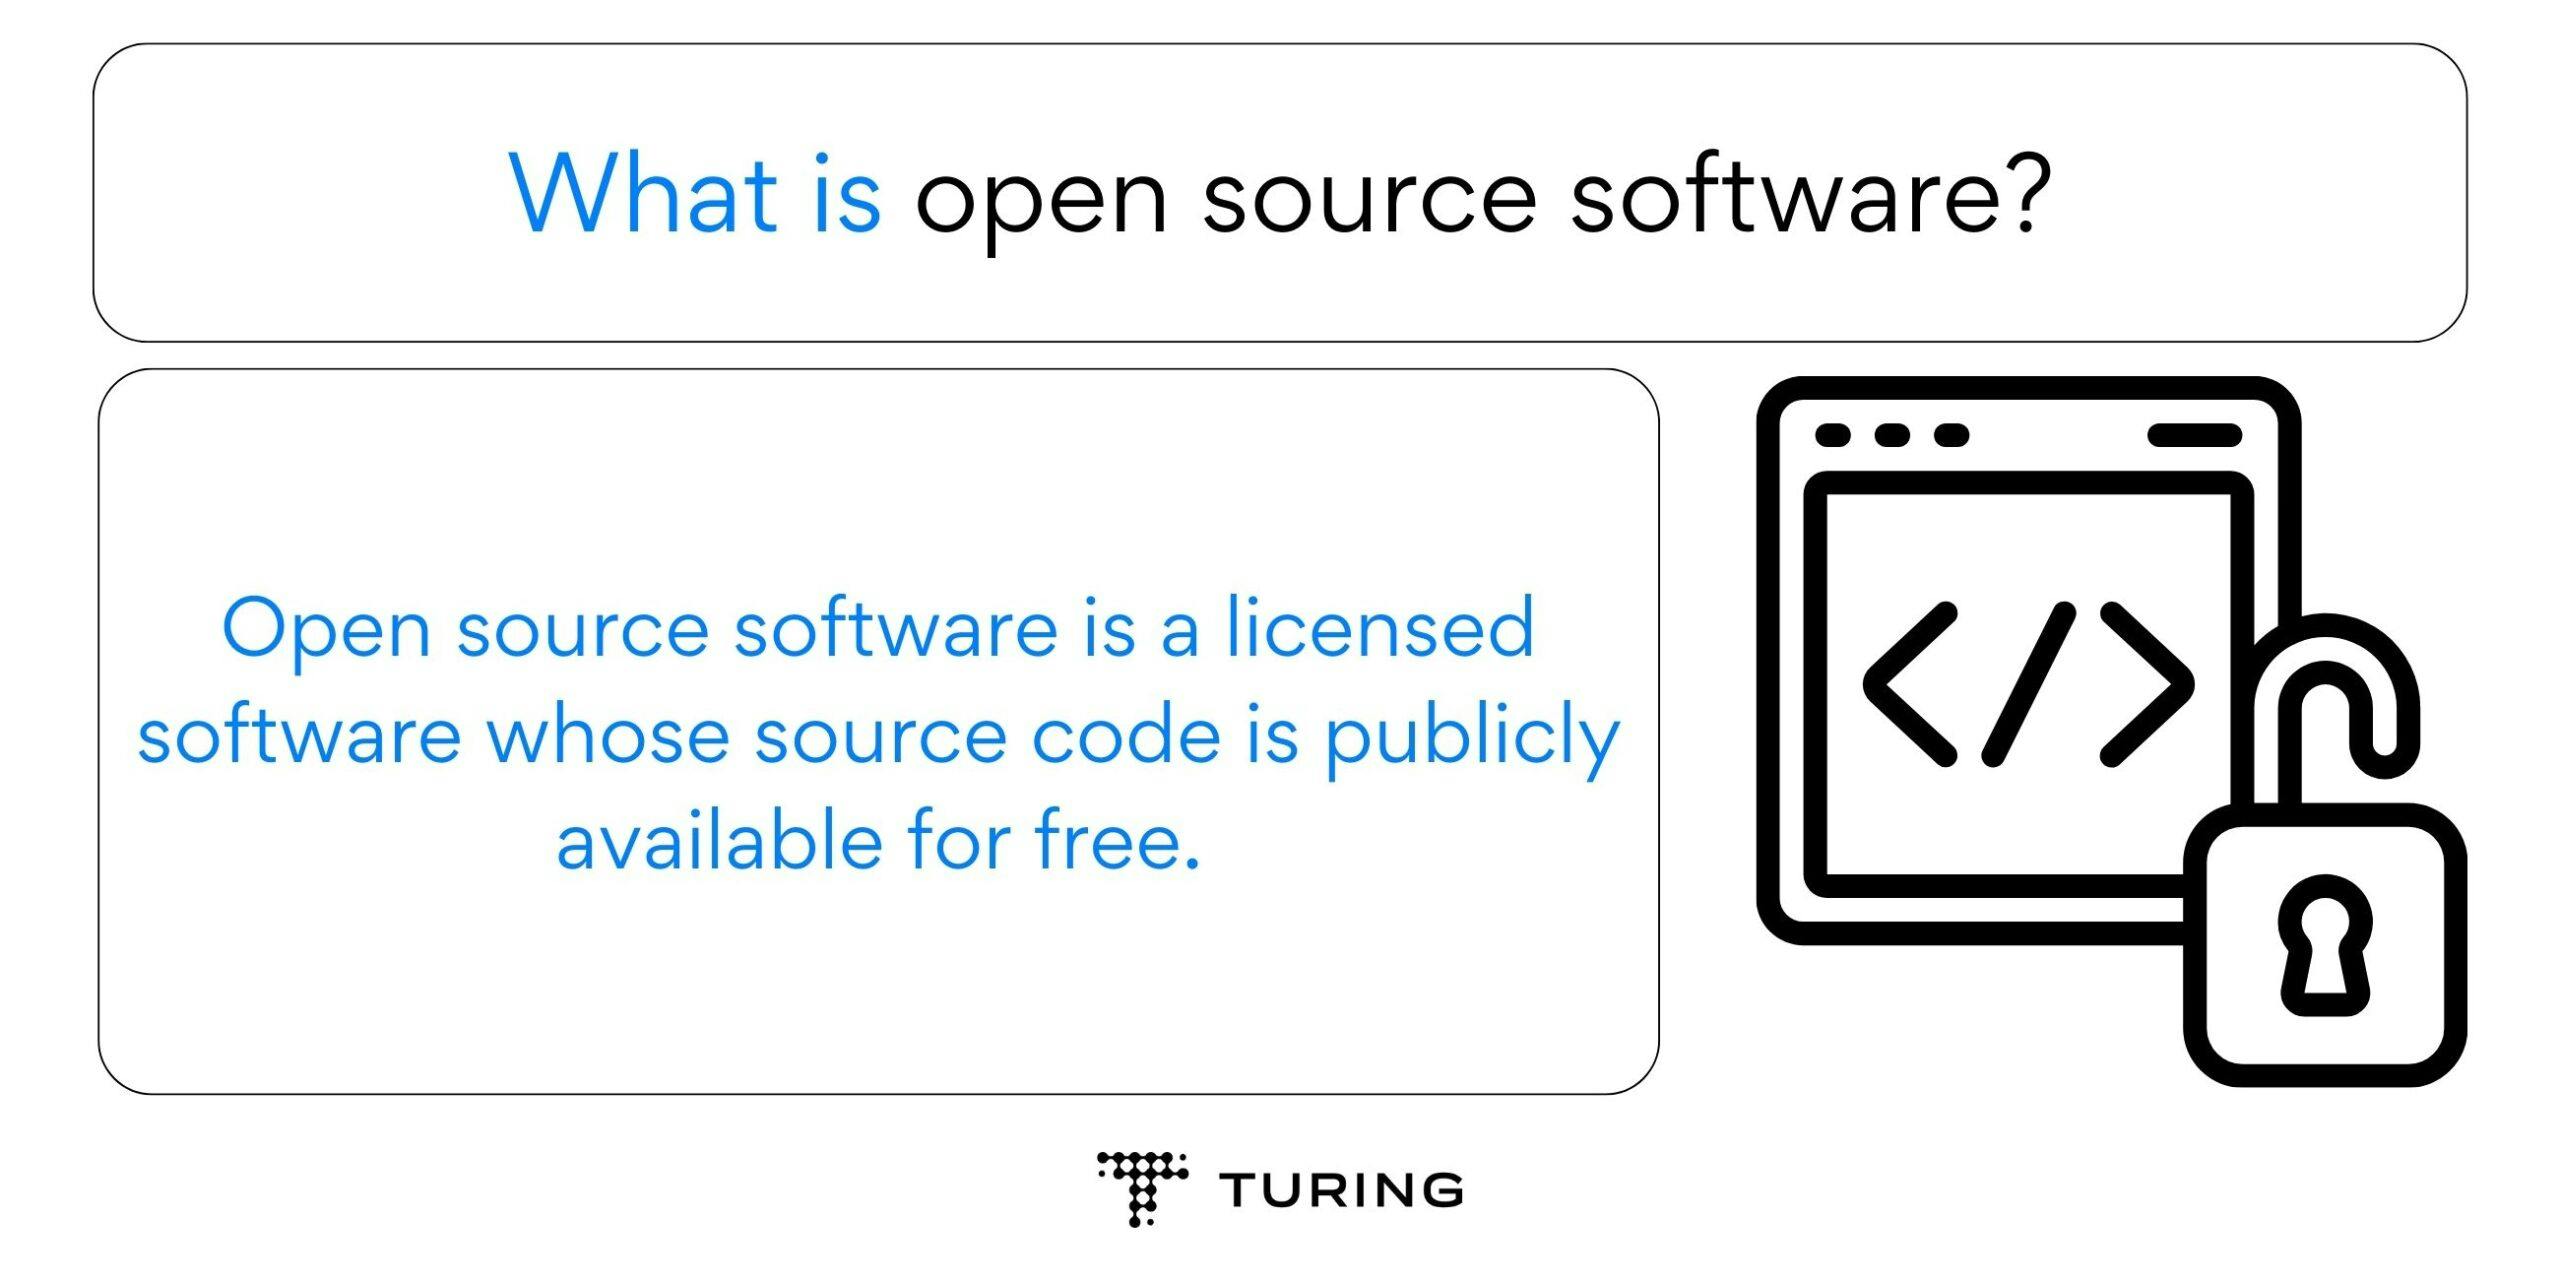 What is open source software